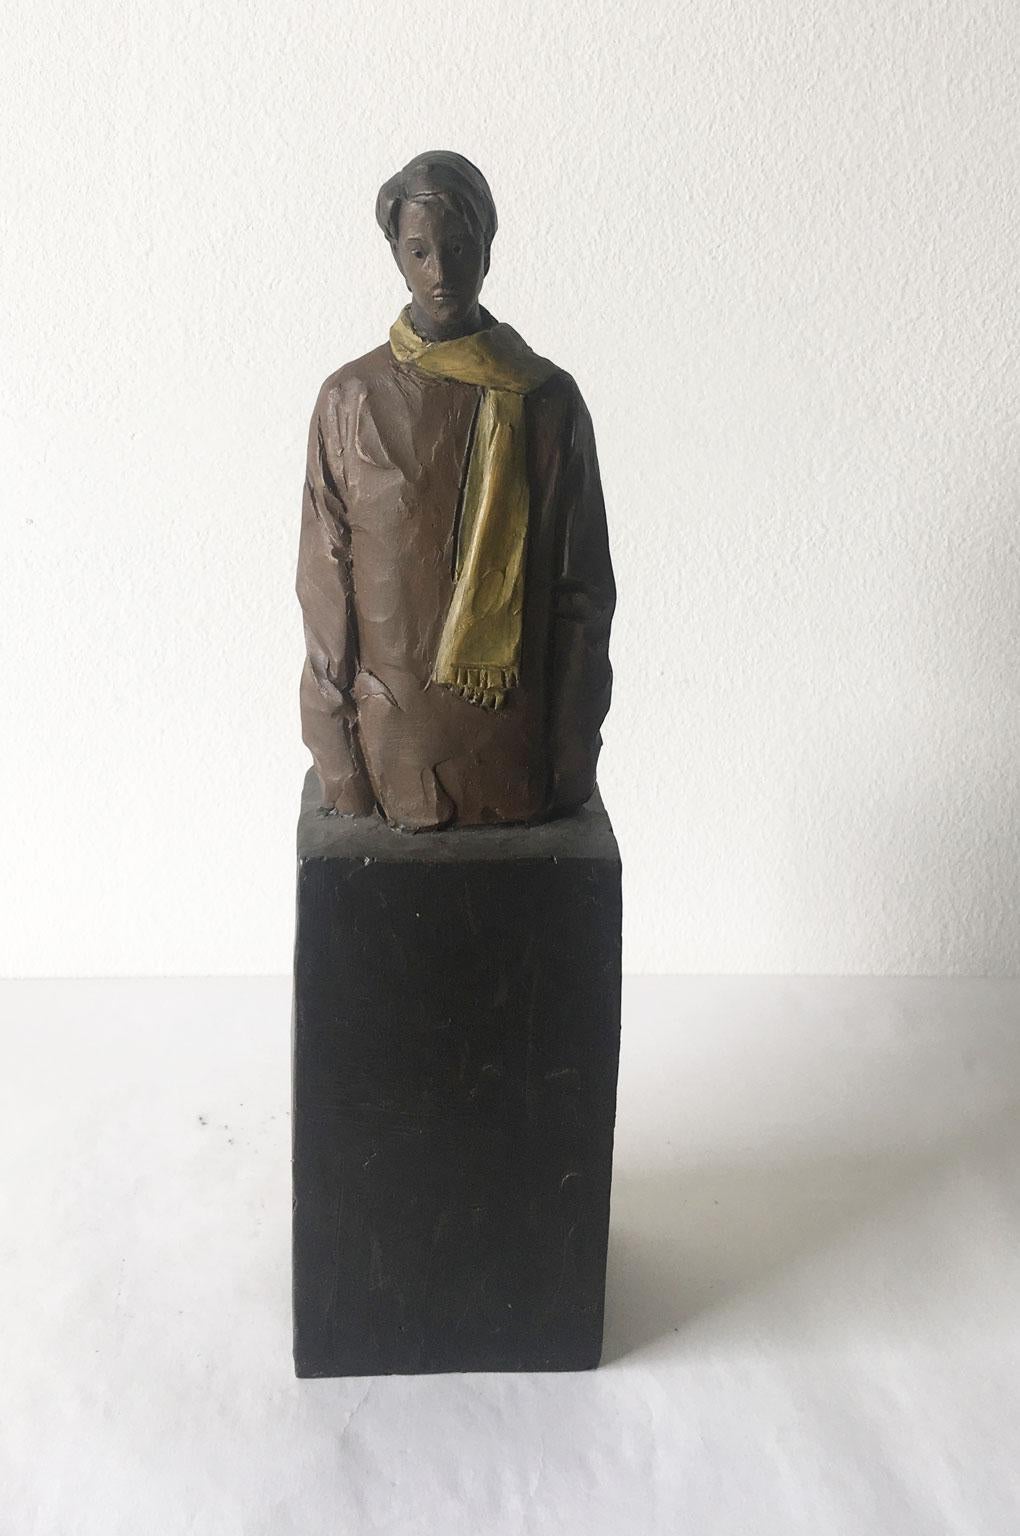 This intense bronze sculpture was made by the well known Italian artist, Aron Demetz, in 2004, Italy.
This is a lost wax bronze hand painted. The title is "Il grande freddo" translated in "The big winter"

Aron Demetz was born in 1972 in Selva di